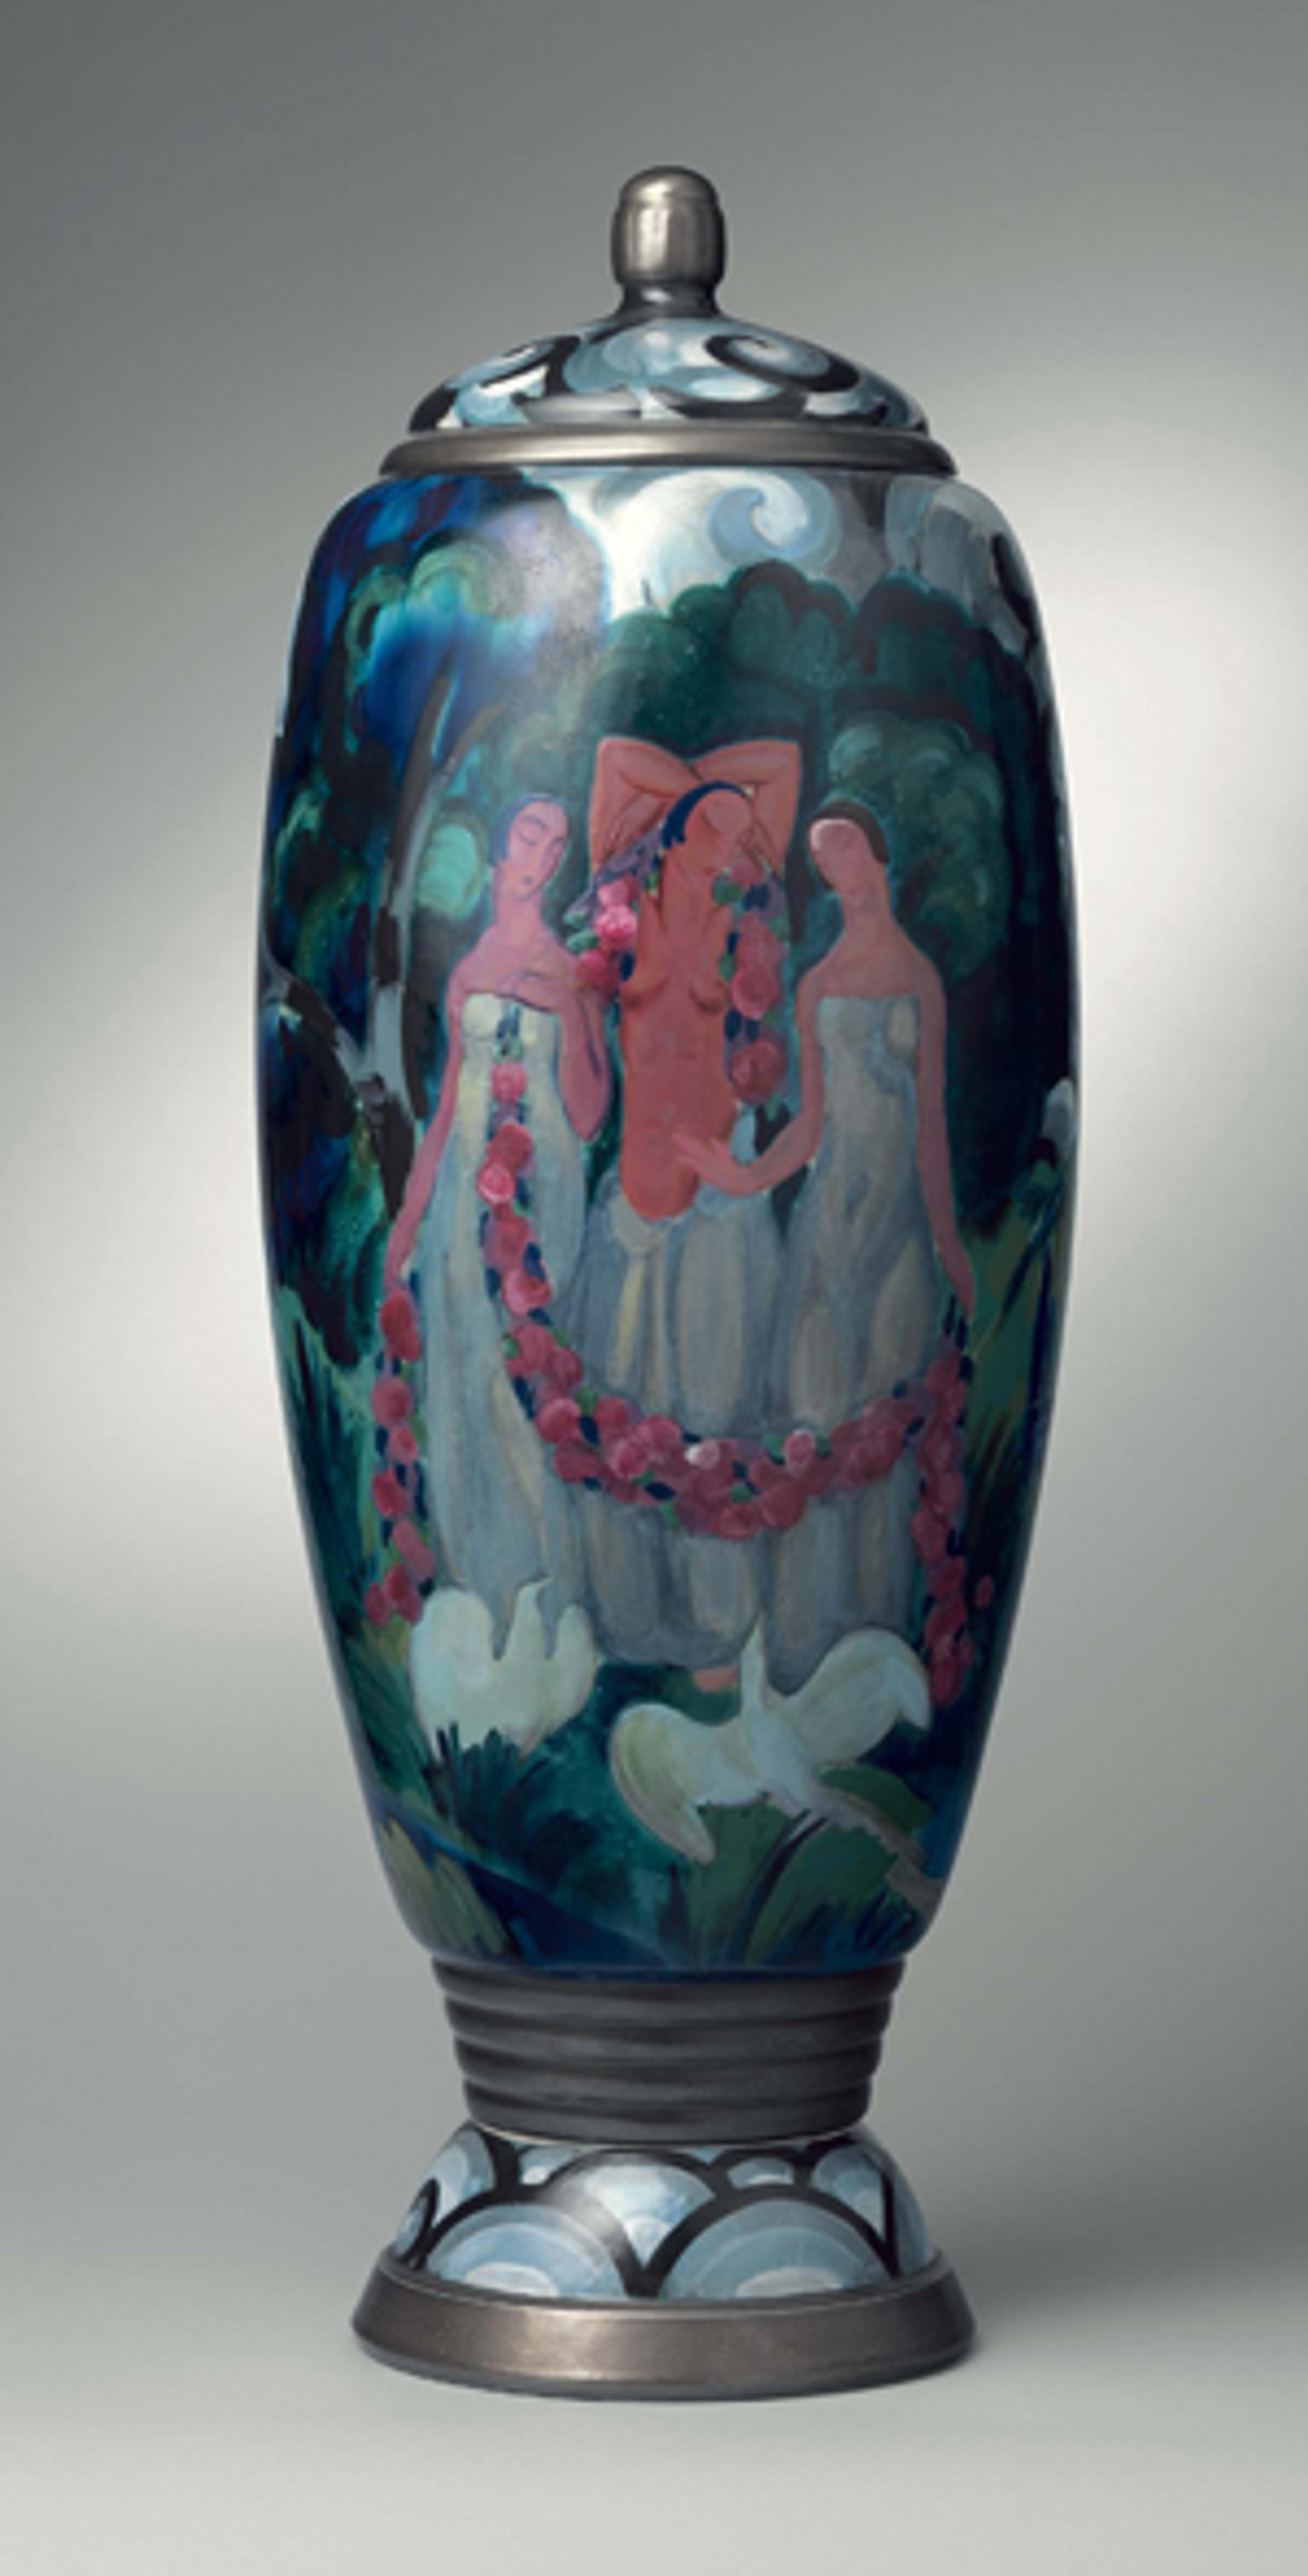 Left: French Art Deco provides information about relatively unknown designers such as René Crevel. René Crevel (French, 1900–1935). Vase with lid, ca. 1925. Sèvres Manufactory (French, 1740–present). Porcelain; H. 28 1/2 in., Diam. 10 in. (71.6 x 25.4 cm). The Metropolitan Museum of Art, New York, Bequest of James H. Stubblebine, 1987 (1987.473.11ab)